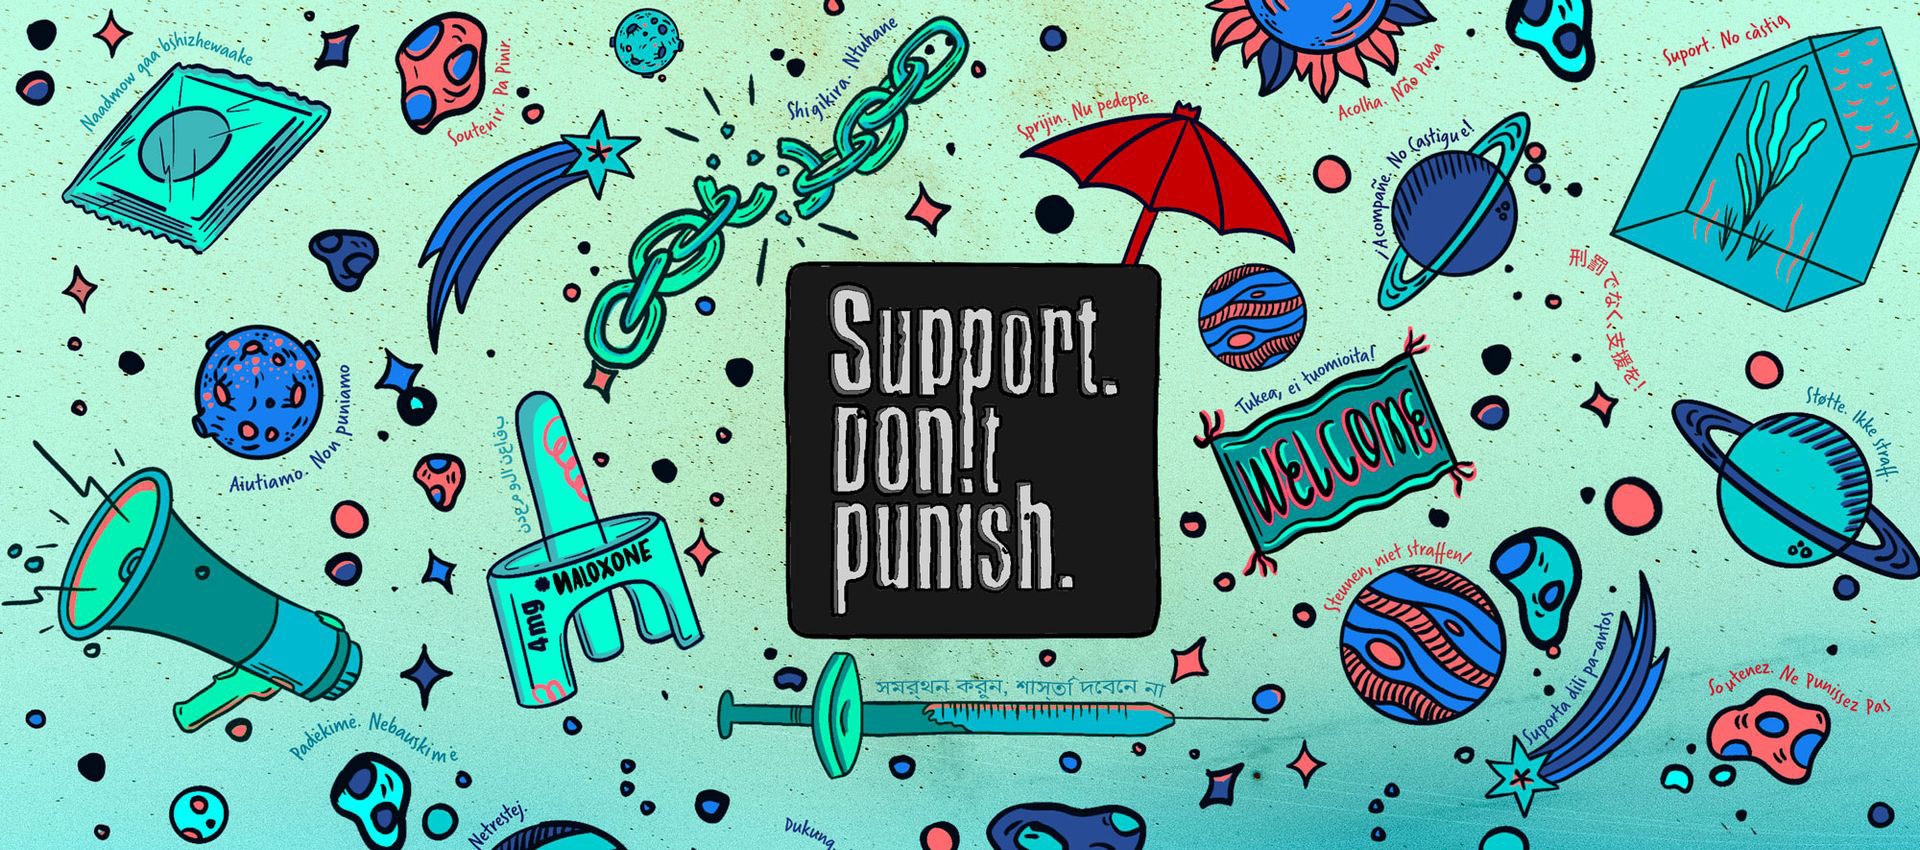 Support Don't Punish campaign